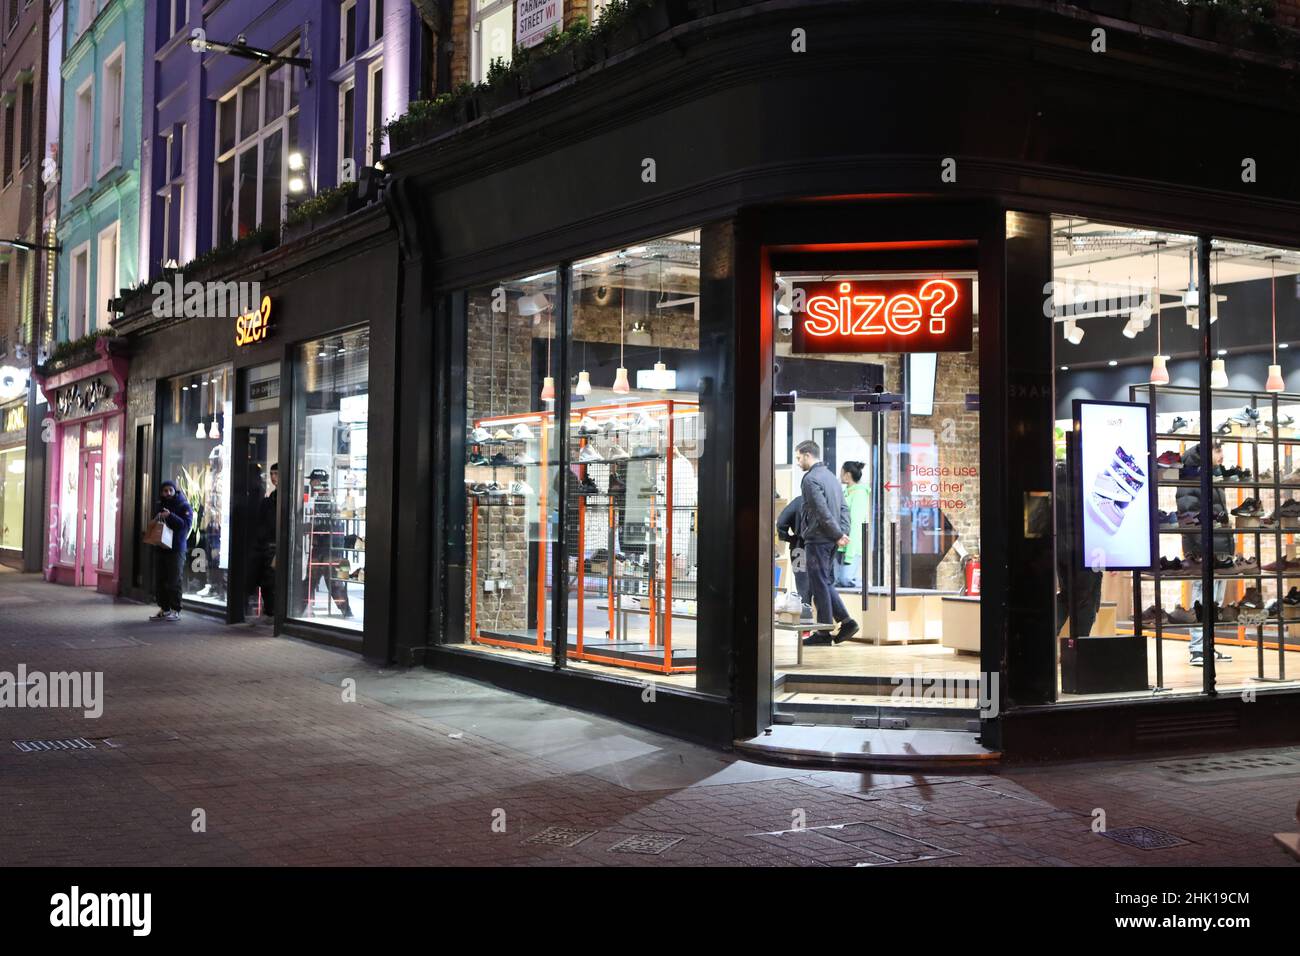 A General view (GV) Size? store at Carnaby, West End London. Stock Photo